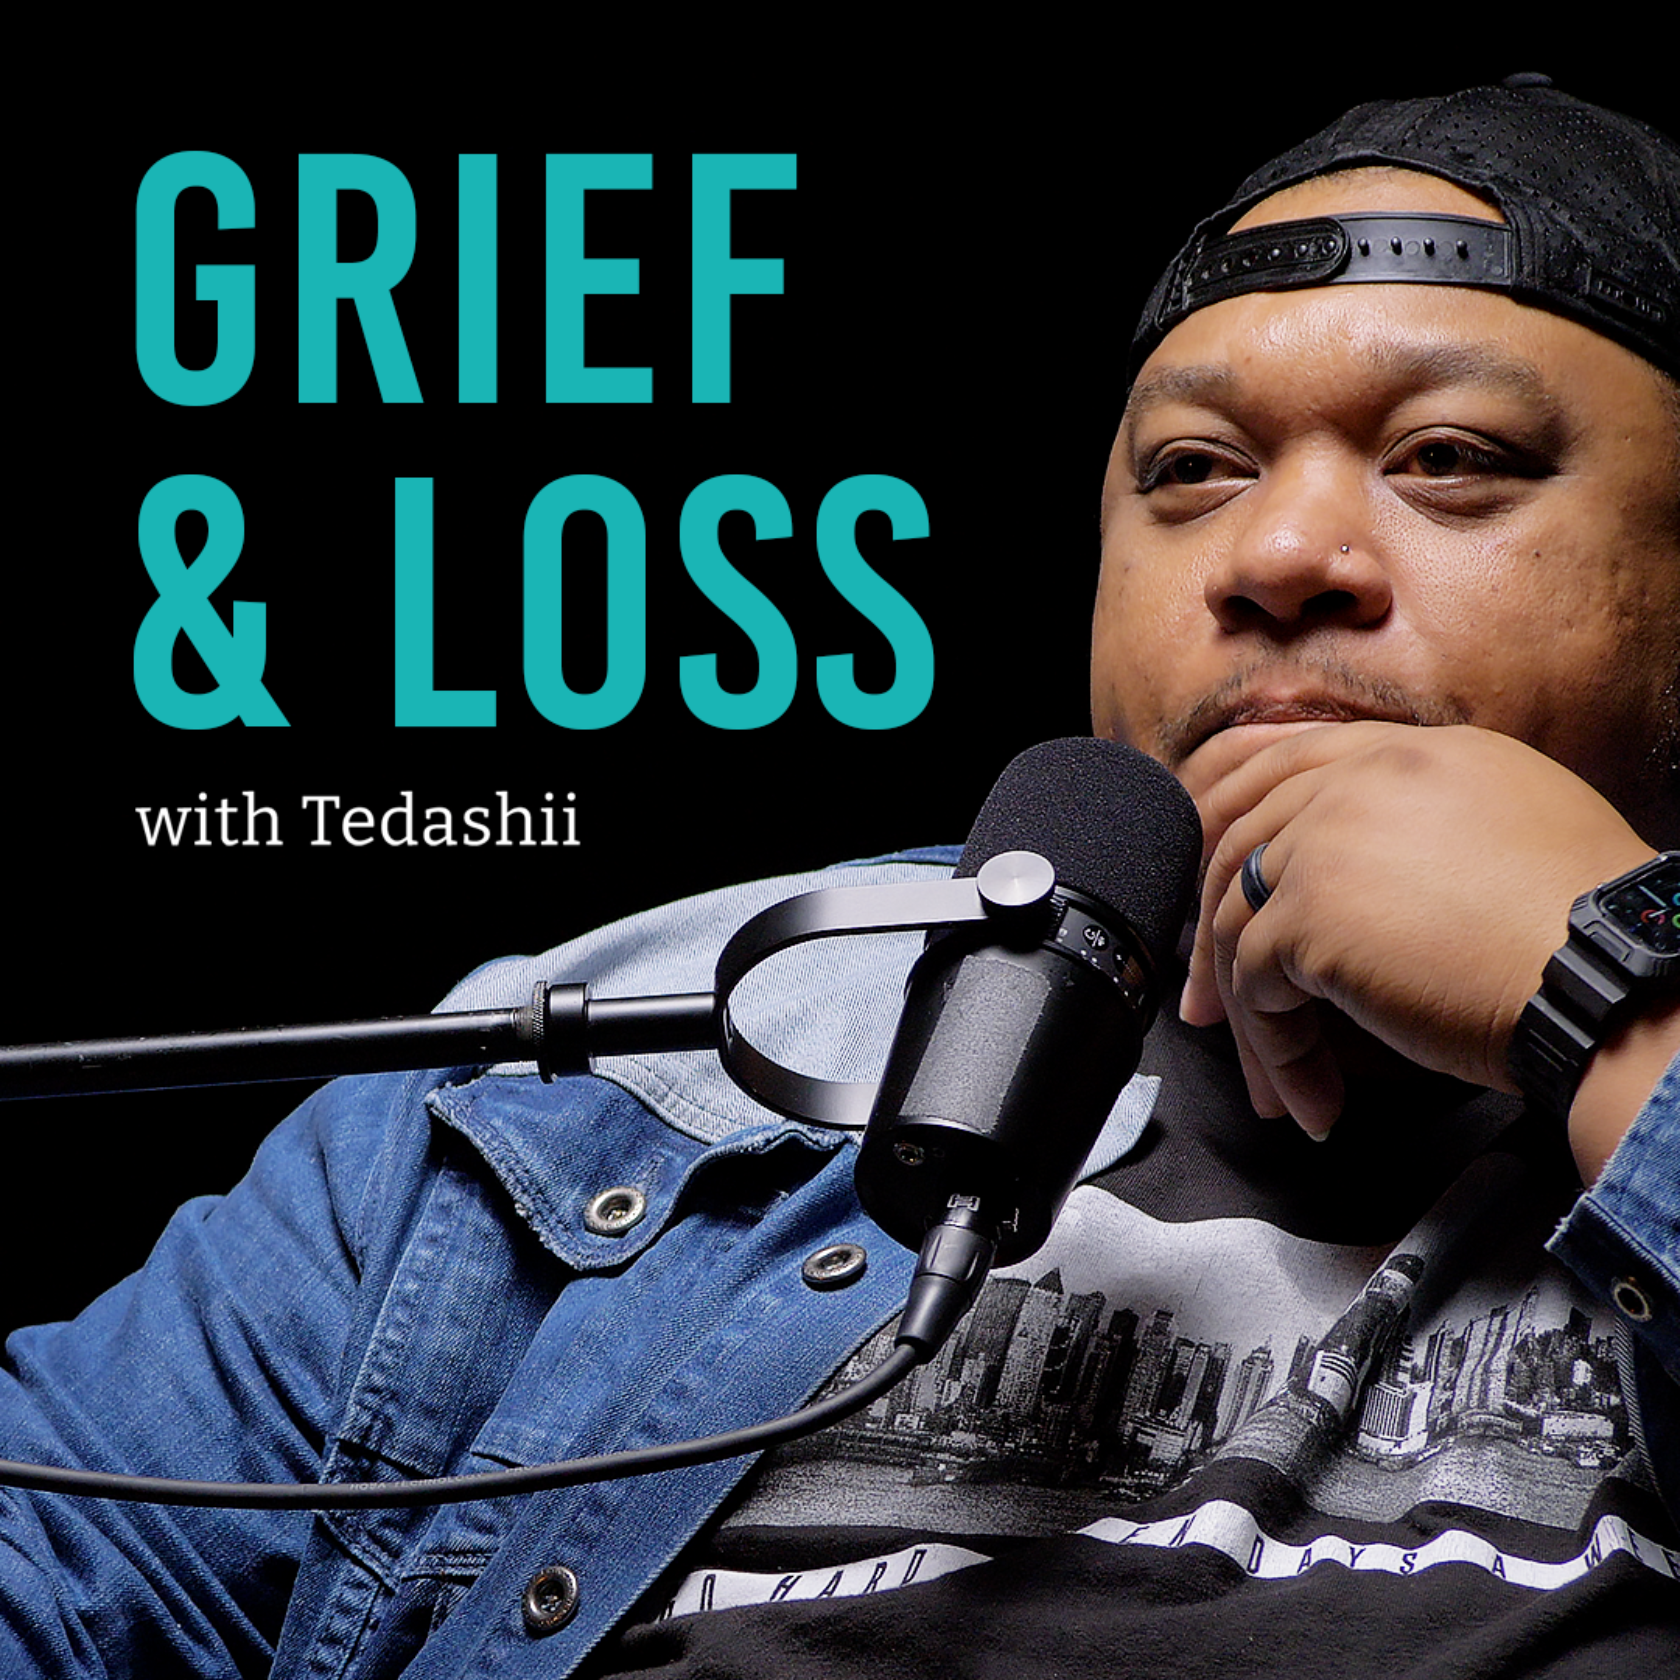 Tedashii on the loss of his son and coping with that pain as a Christian.